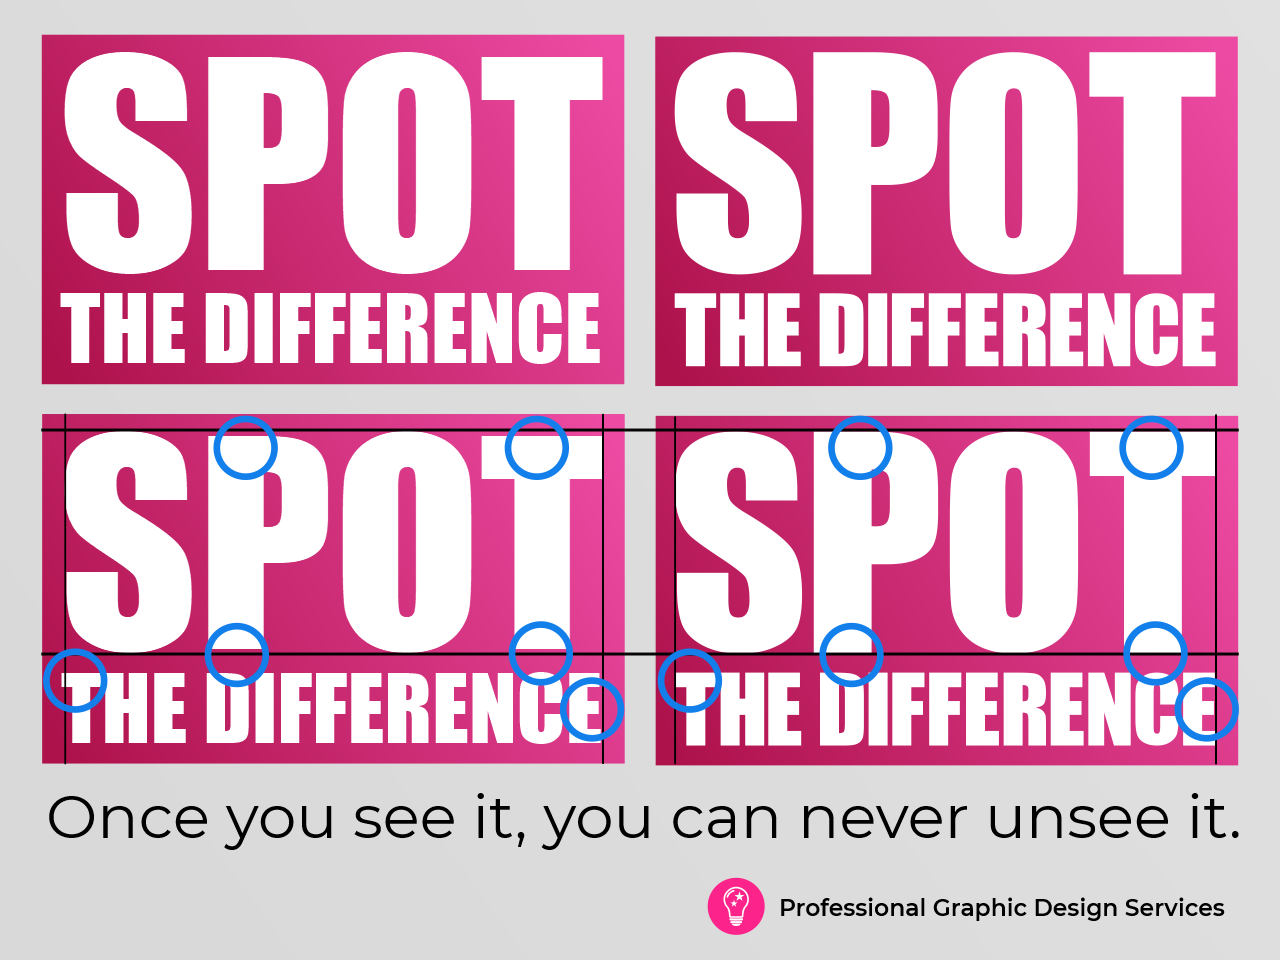 Website Design Company Shows the Difference Graphic Design Can Make